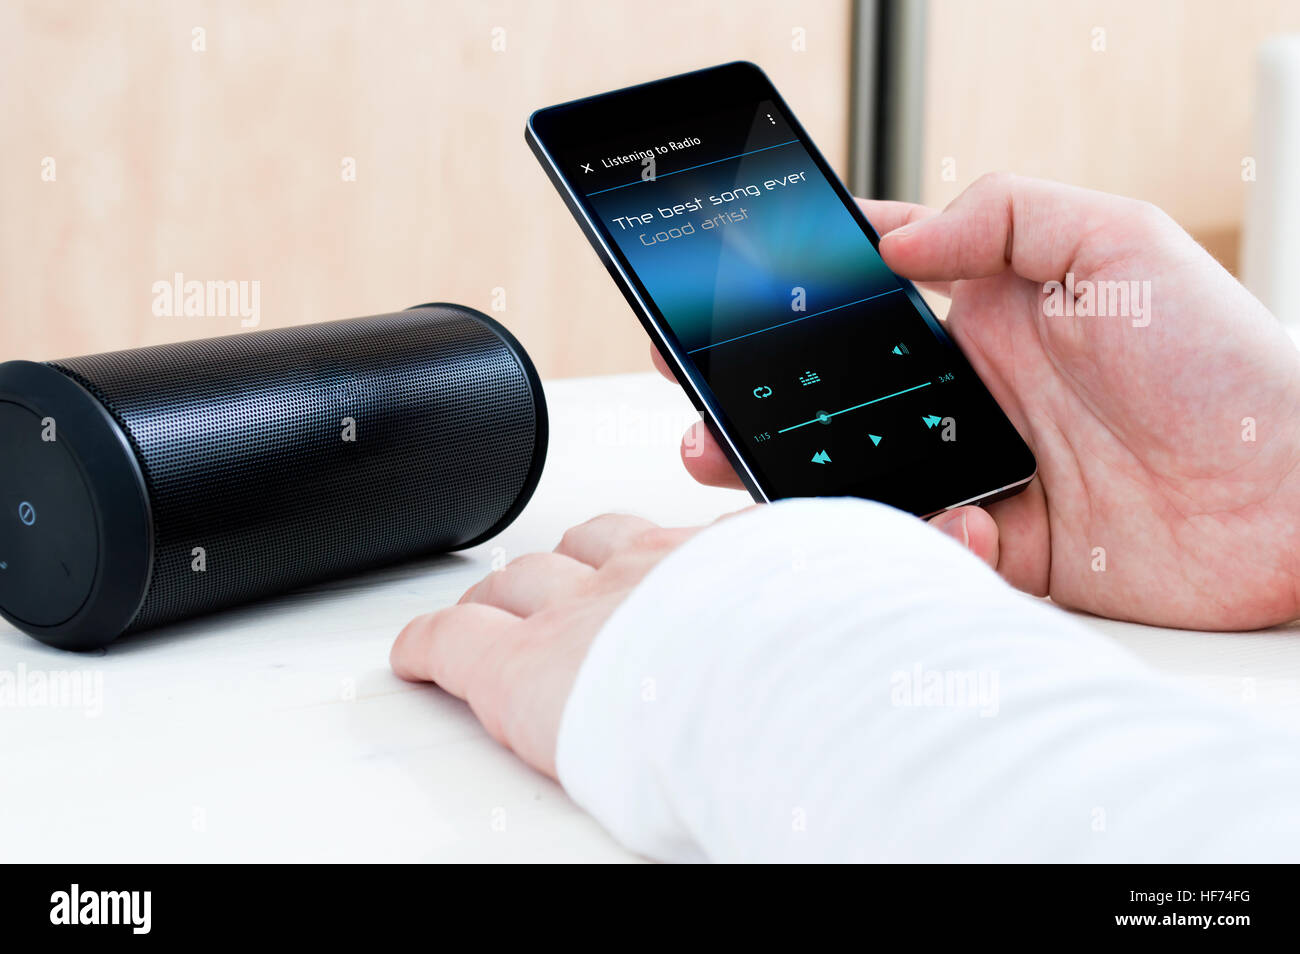 Playing music on a wireless speaker. Stock Photo